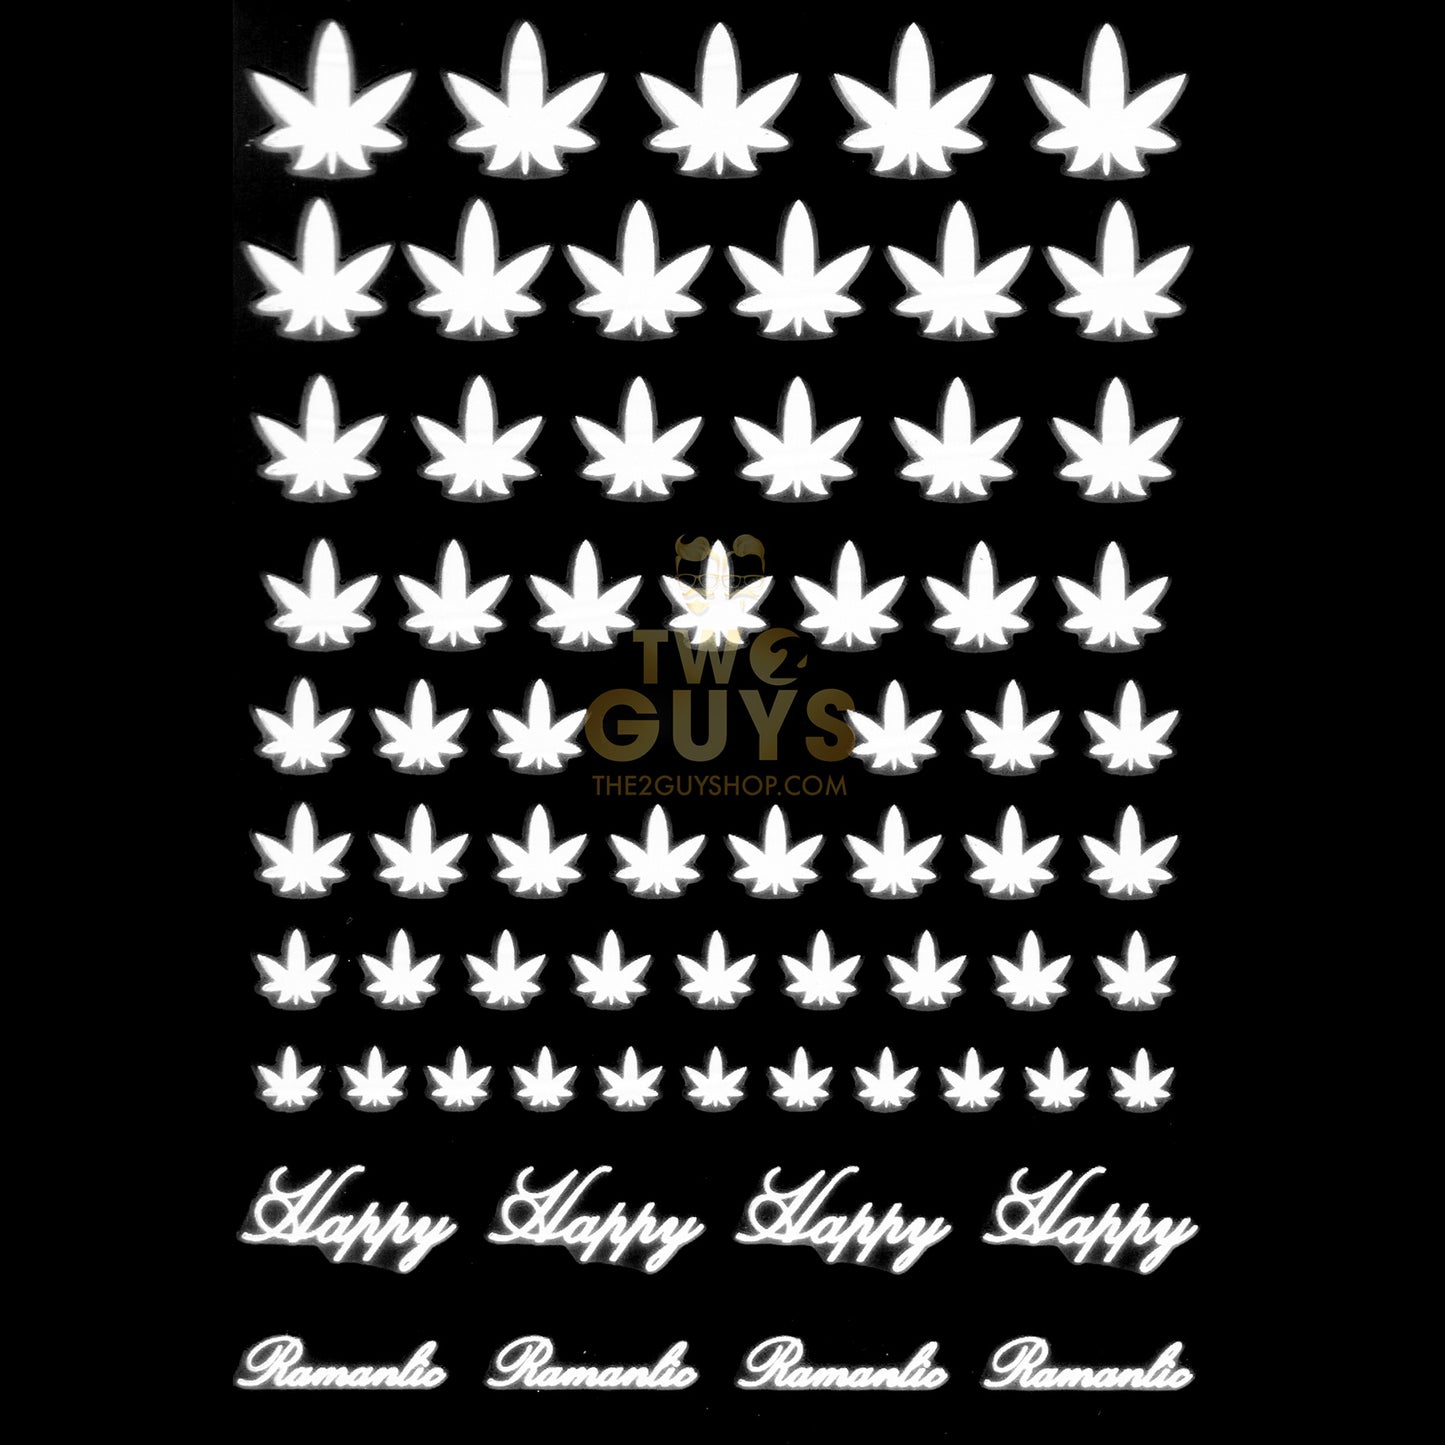 Happy Weed Leaves Stickers Set (3 Colors)